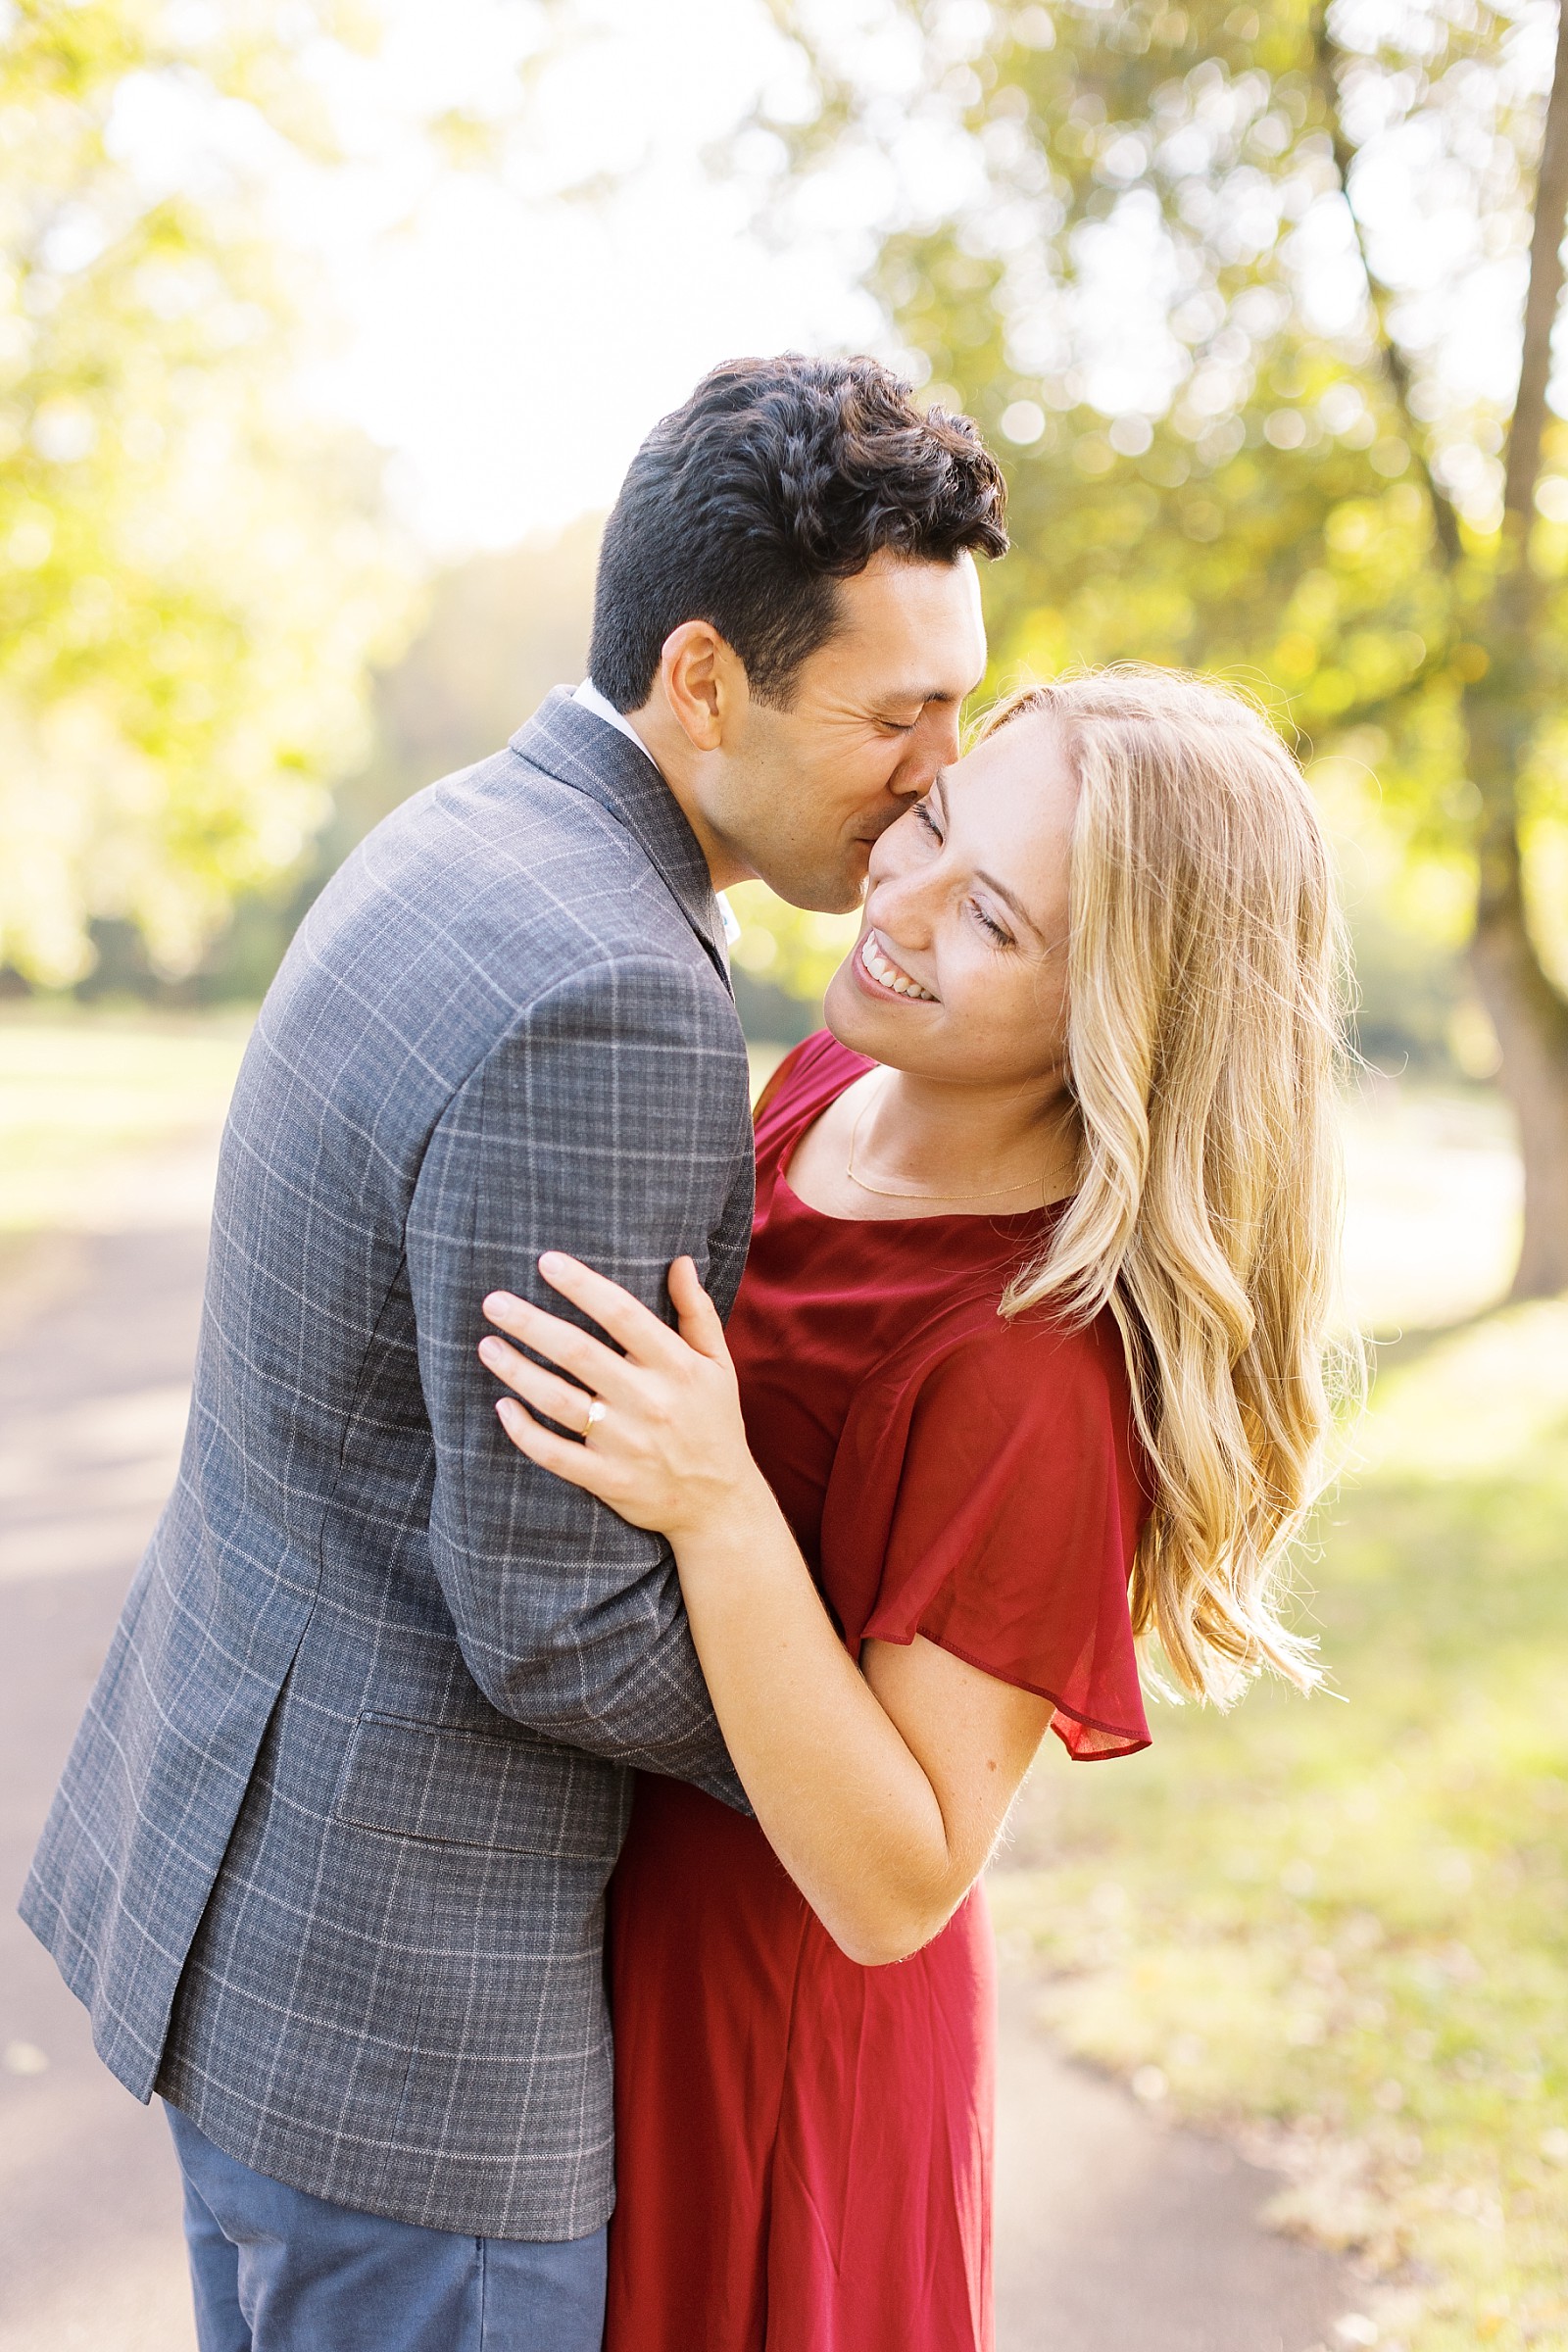 College sweethearts during Joyner Park fall engagement session | Raleigh NC wedding photographer